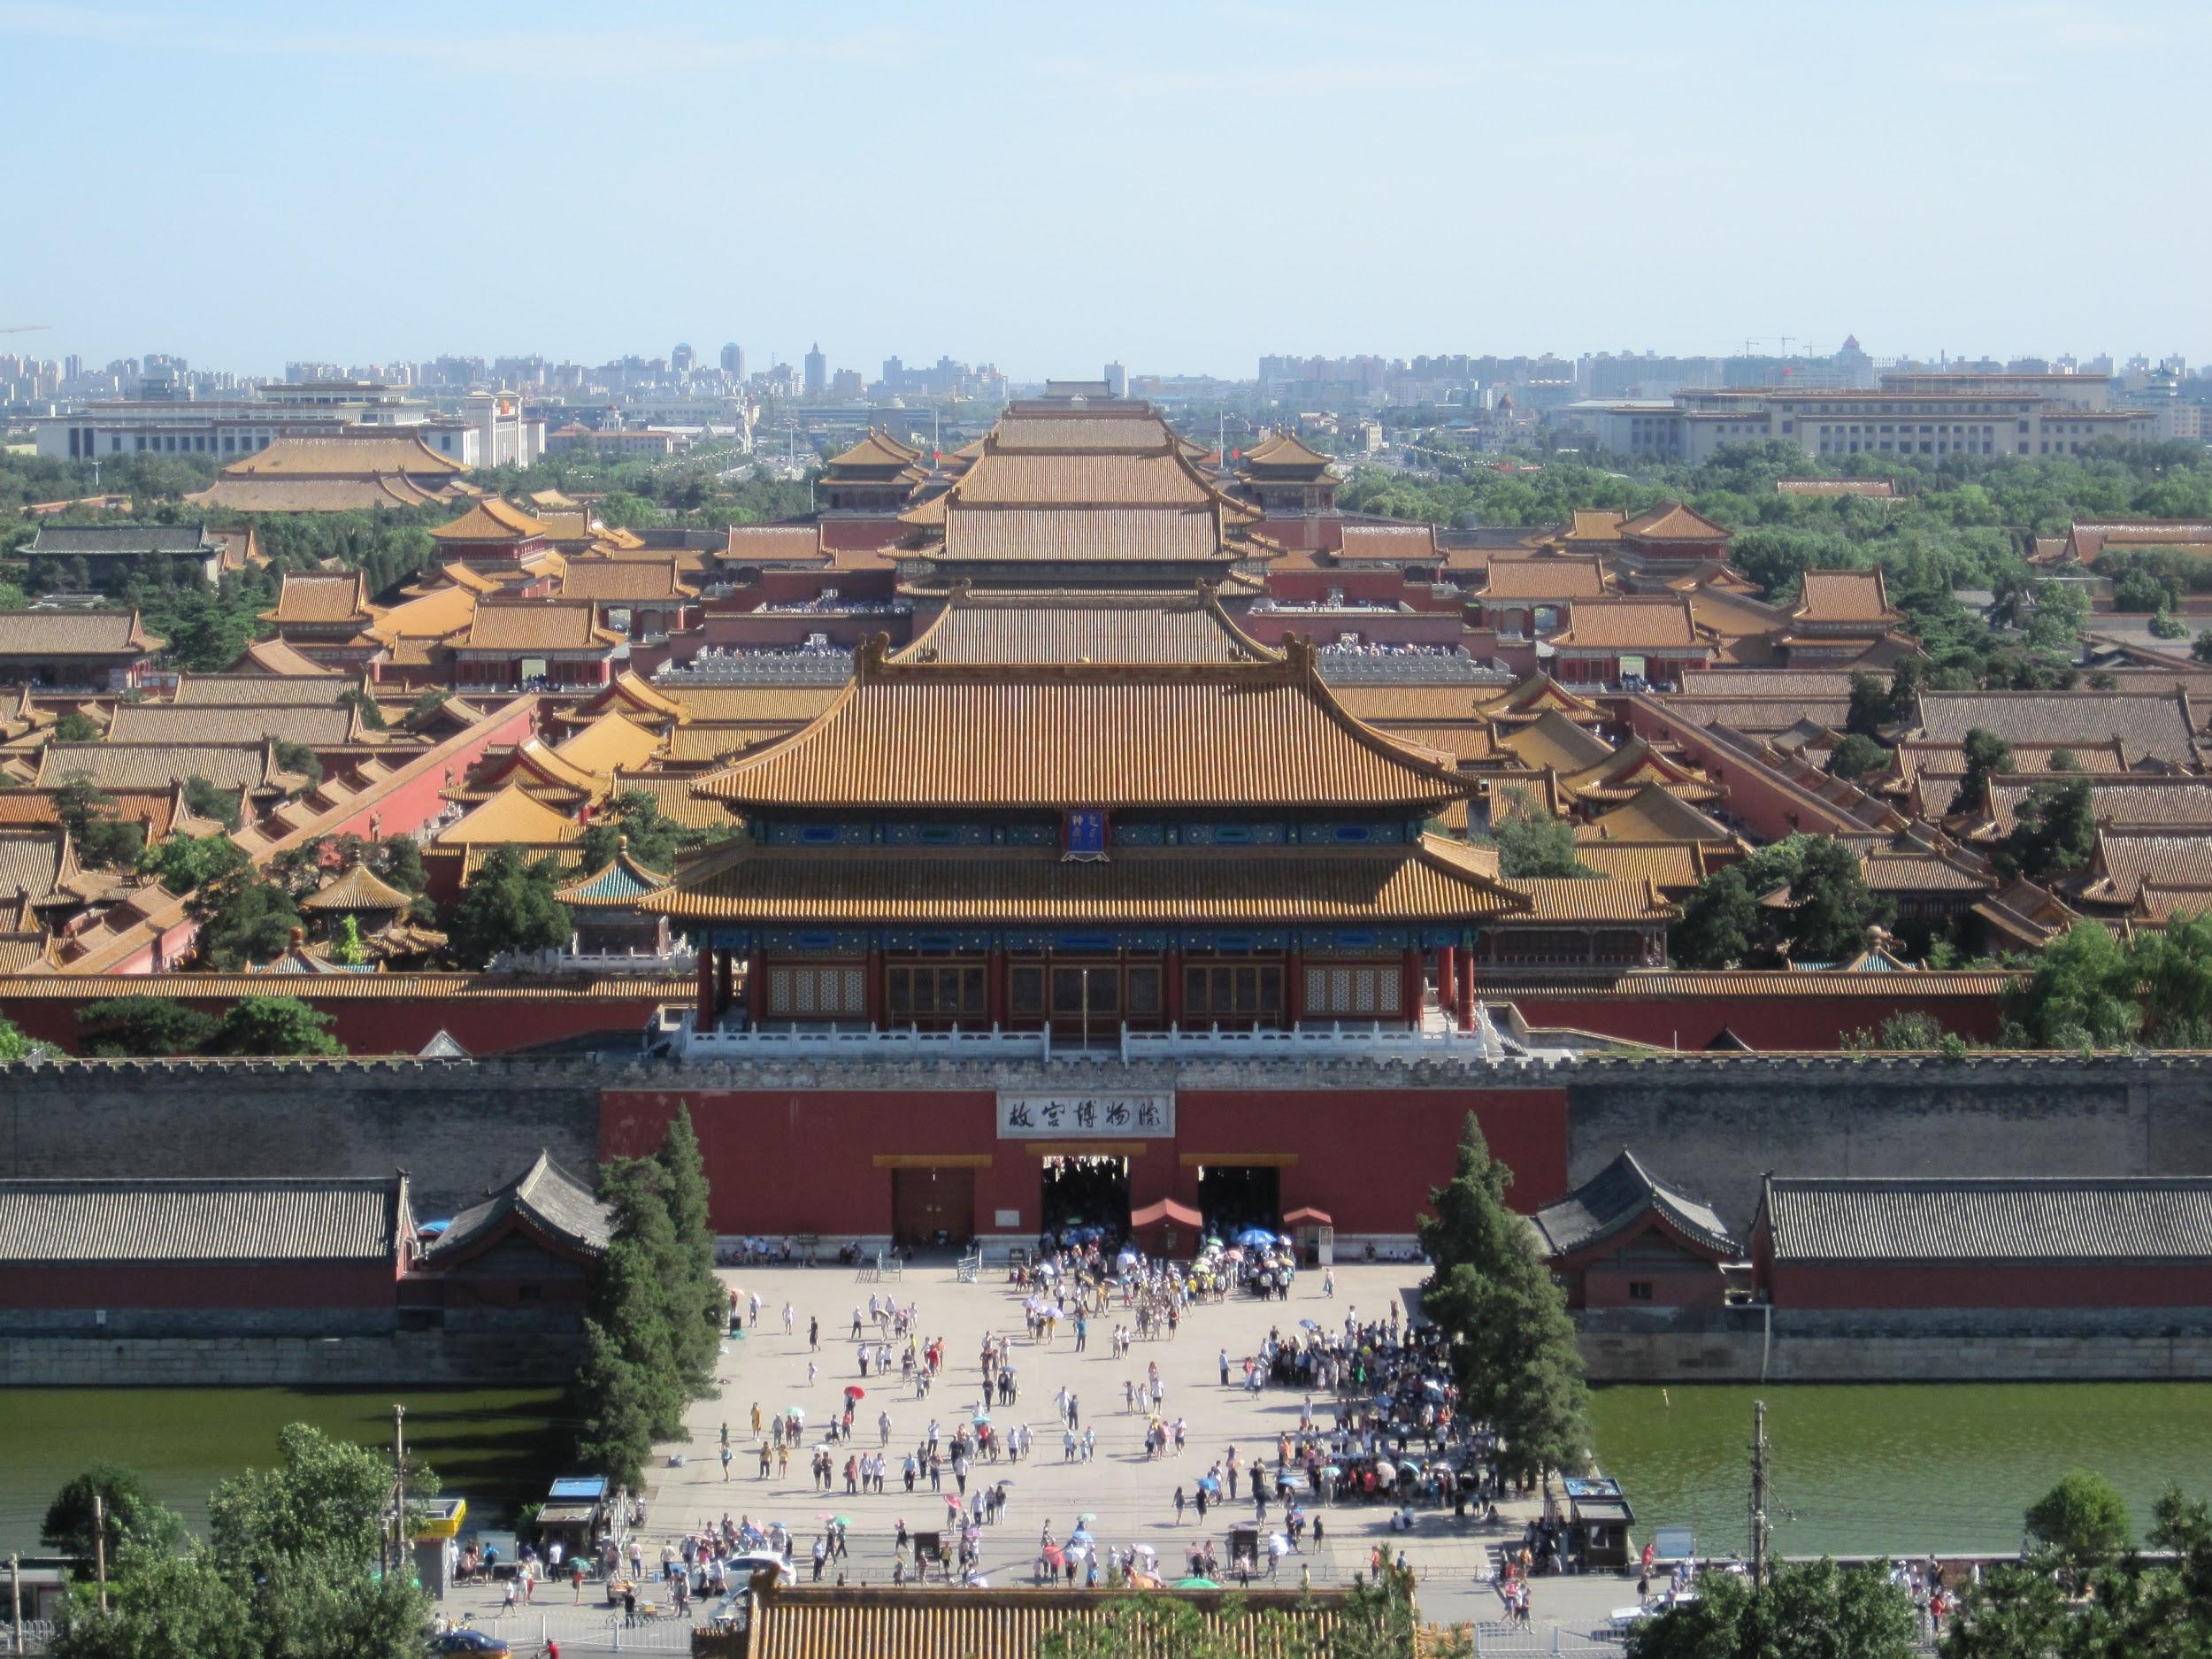 Image of Forbidden City Complex viewed from Jingshan Park by Ming Dynasty Maker(s) of China